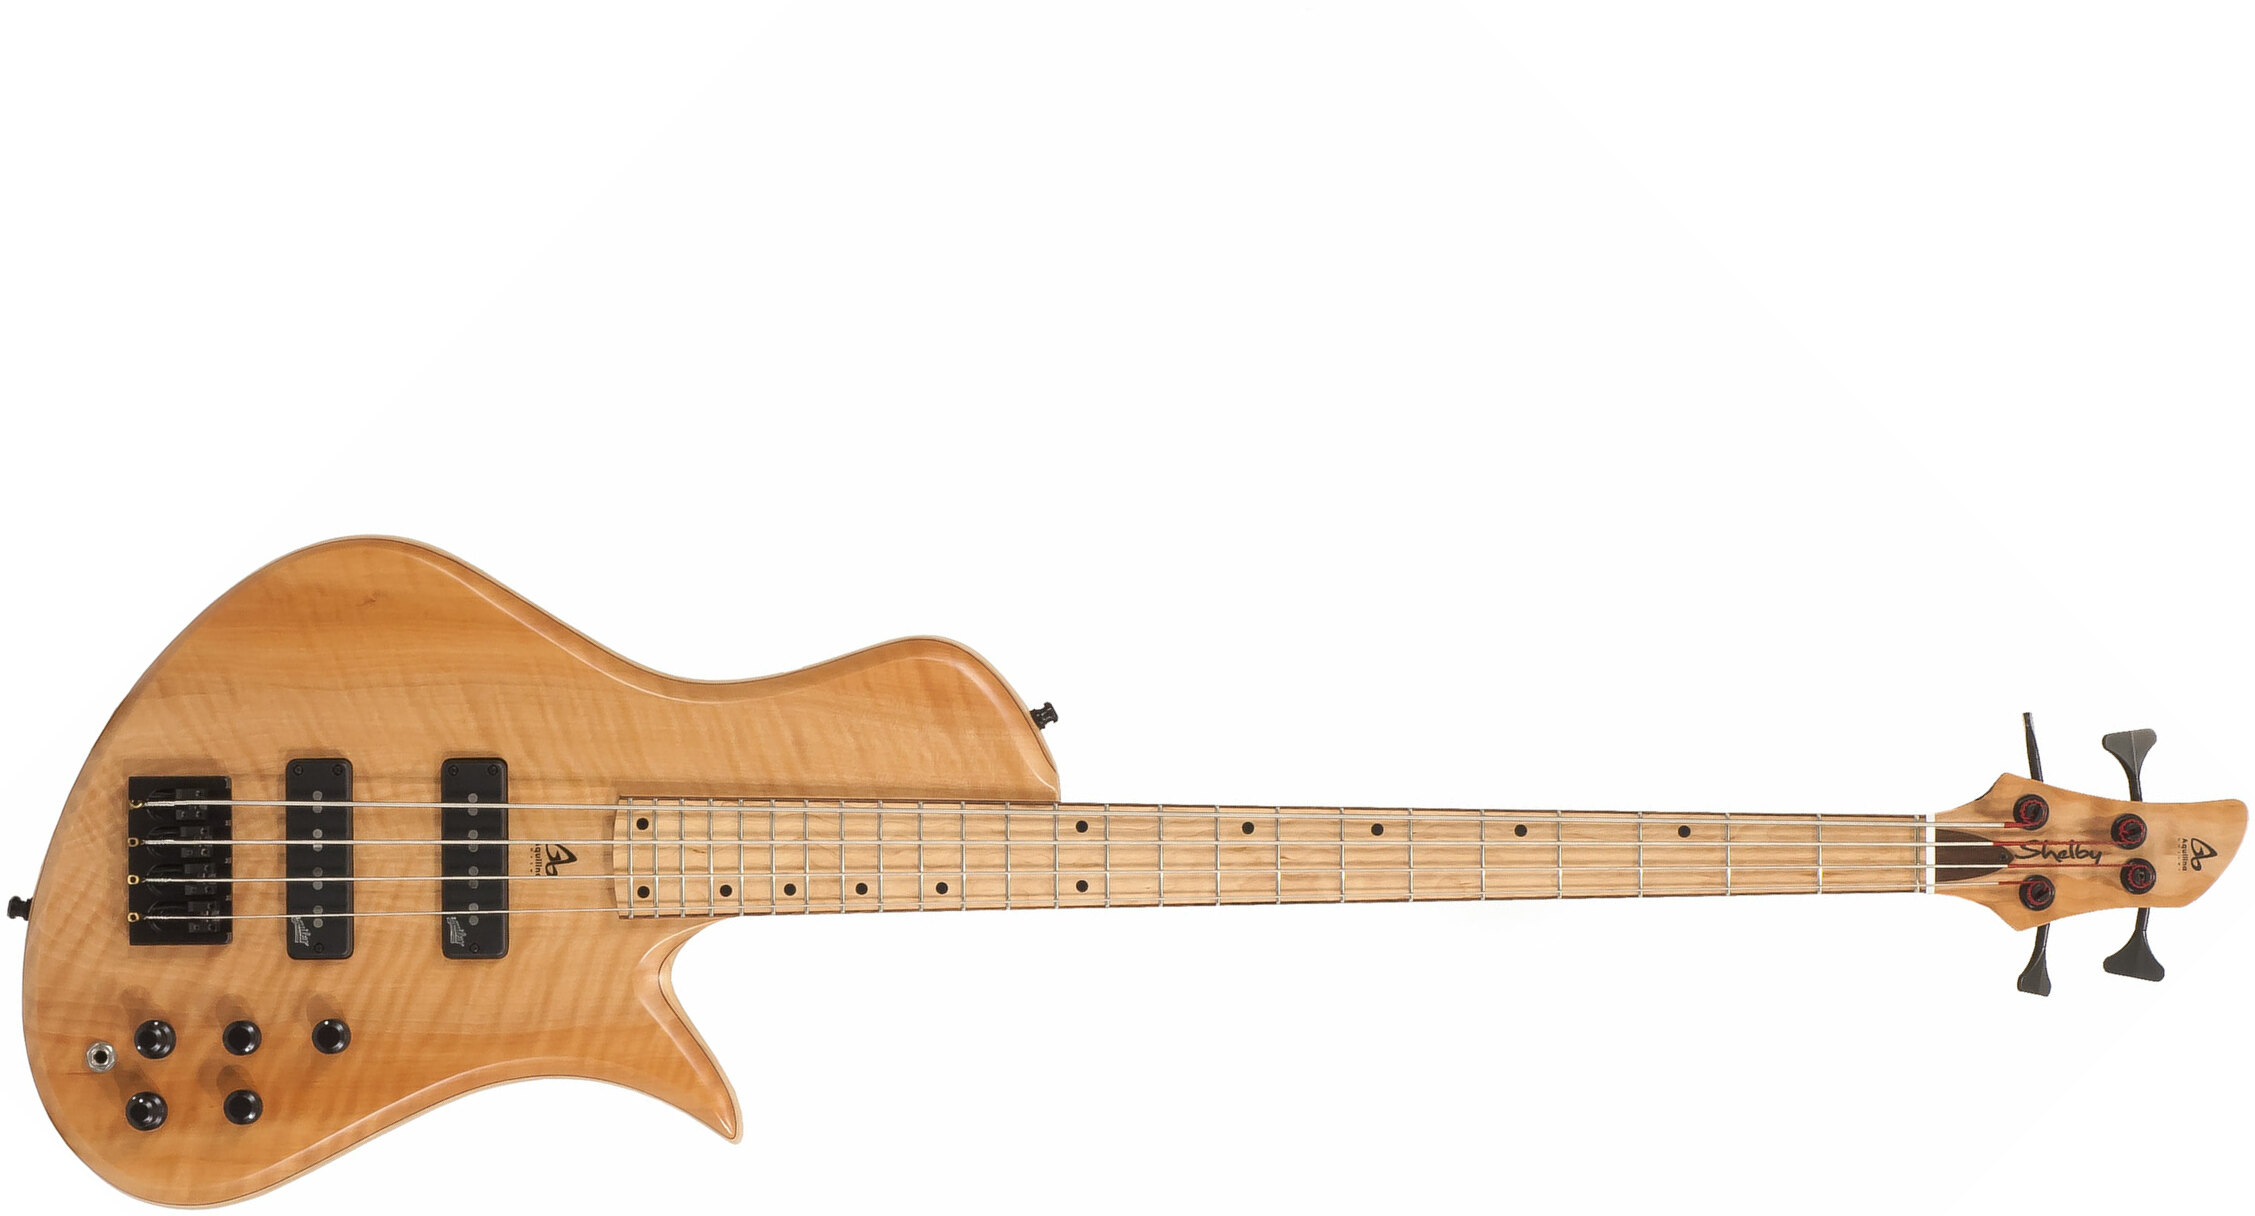 Aquilina Shelby 4 Custom Aulne/frene Active J.east Noi #01854 - Natural - Solid body elektrische bas - Main picture